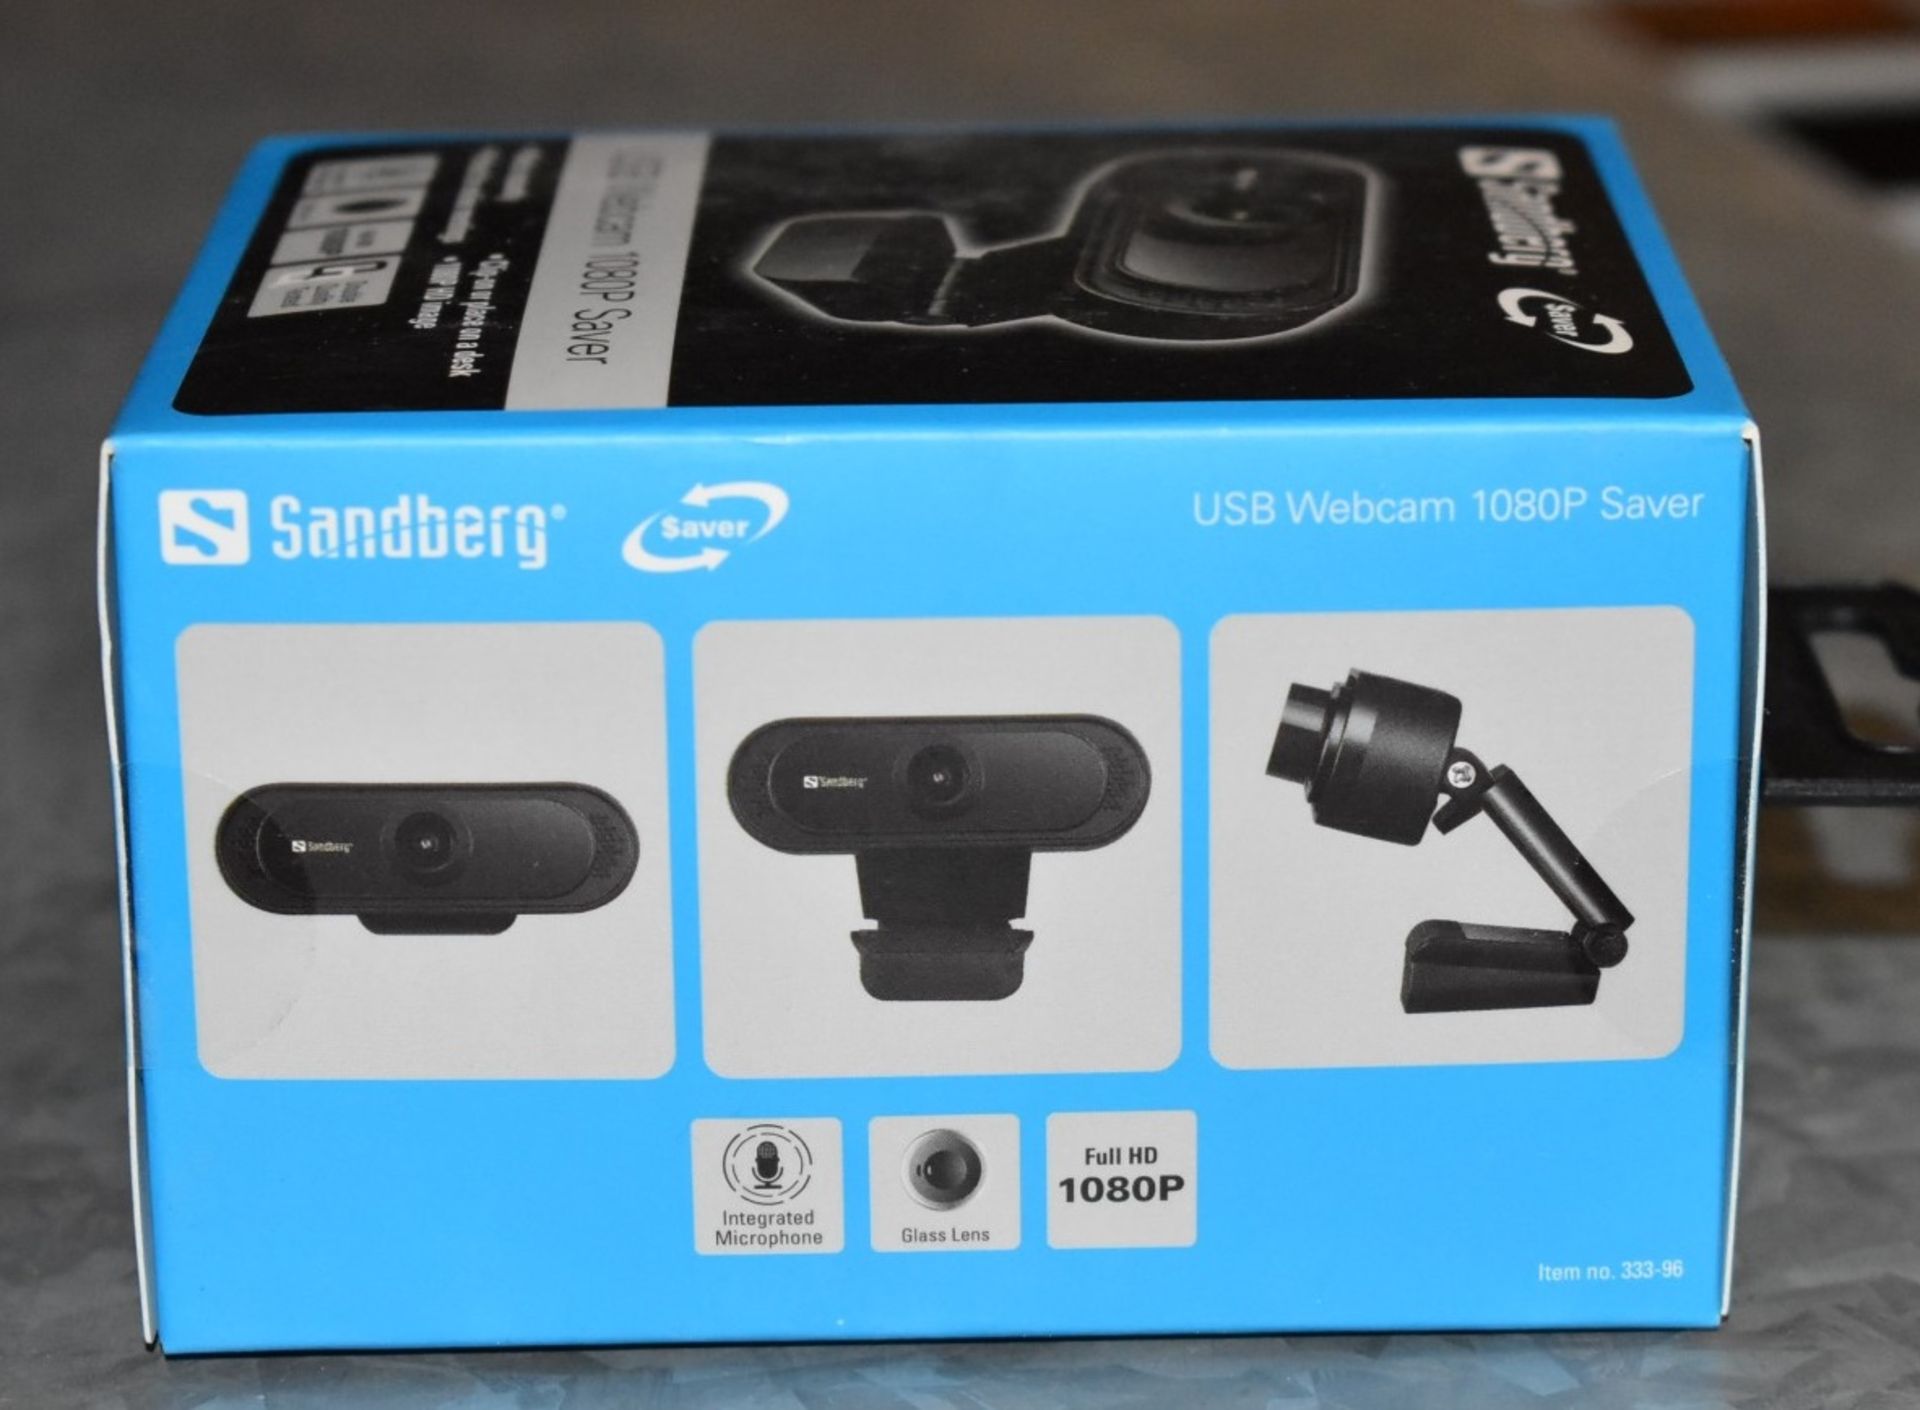 5 x Sandberg USB Full HD 1080p Webcams With Microphone - RRP £34.99 - New Boxed Stock - Image 3 of 3